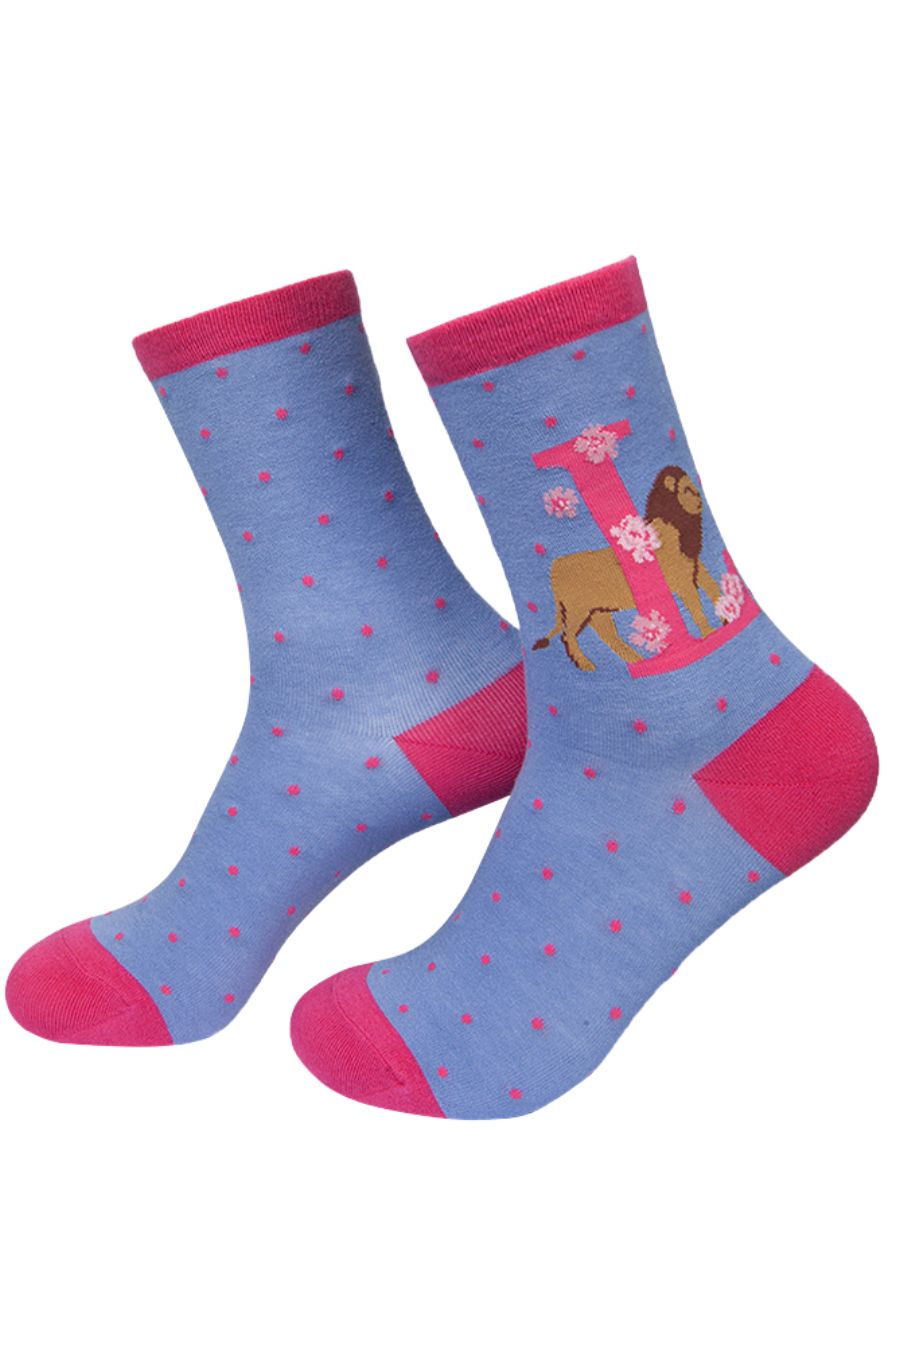 lilac blue socks with a large letter l, a lion and a floral pattern on the ankle